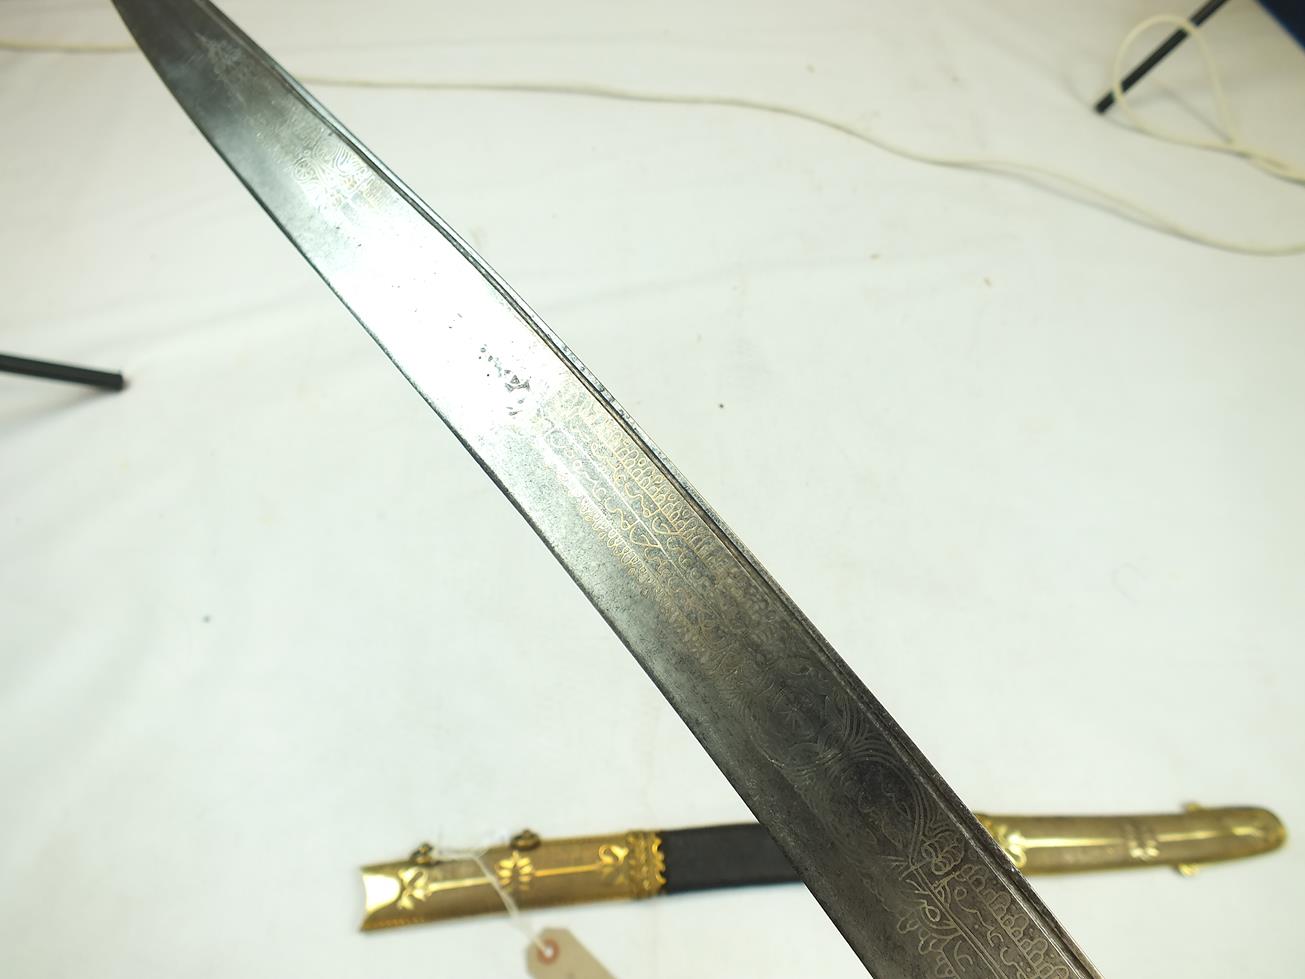 AN HIGHLY UNUSUAL PRESENTATION QUALITY MAMELUKE HILTED DIRK MOUNTED WITH A YATAGHAN BLADE BY SALTER, - Image 17 of 26